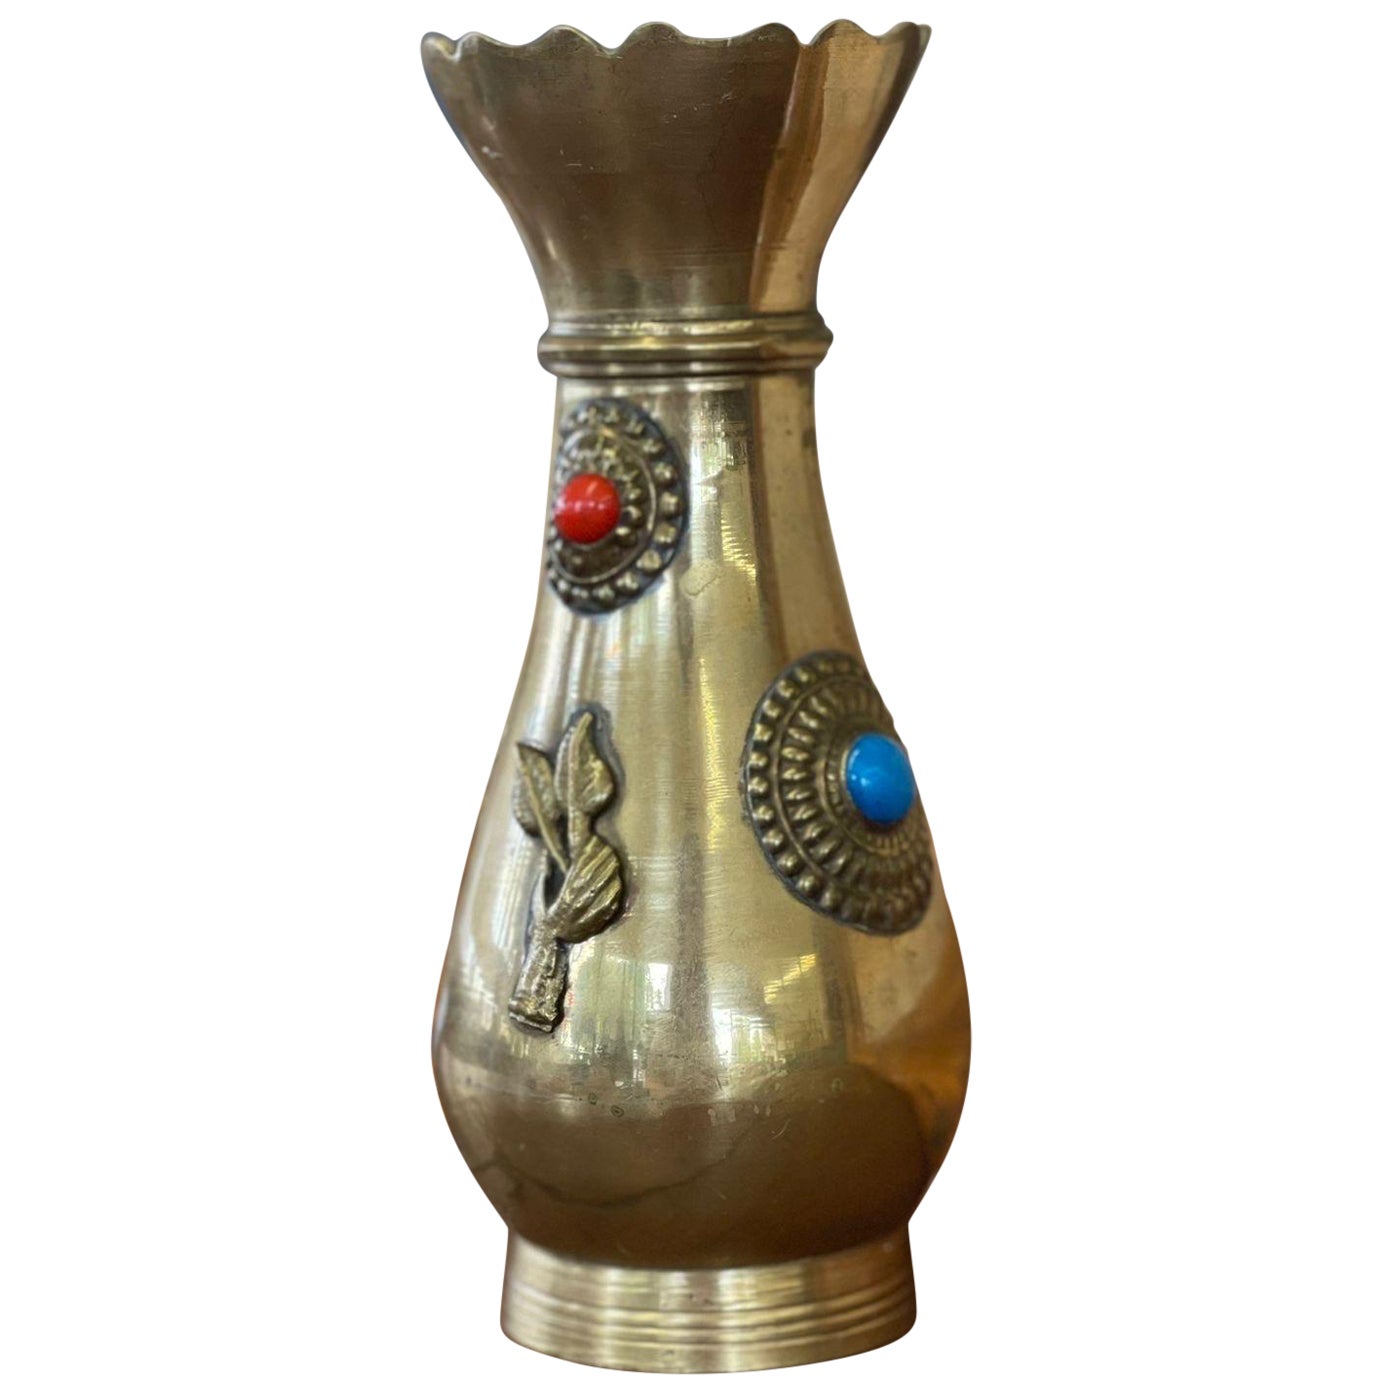 Antique Decorative Brass Bejeweled Vase Red and Blue Accents